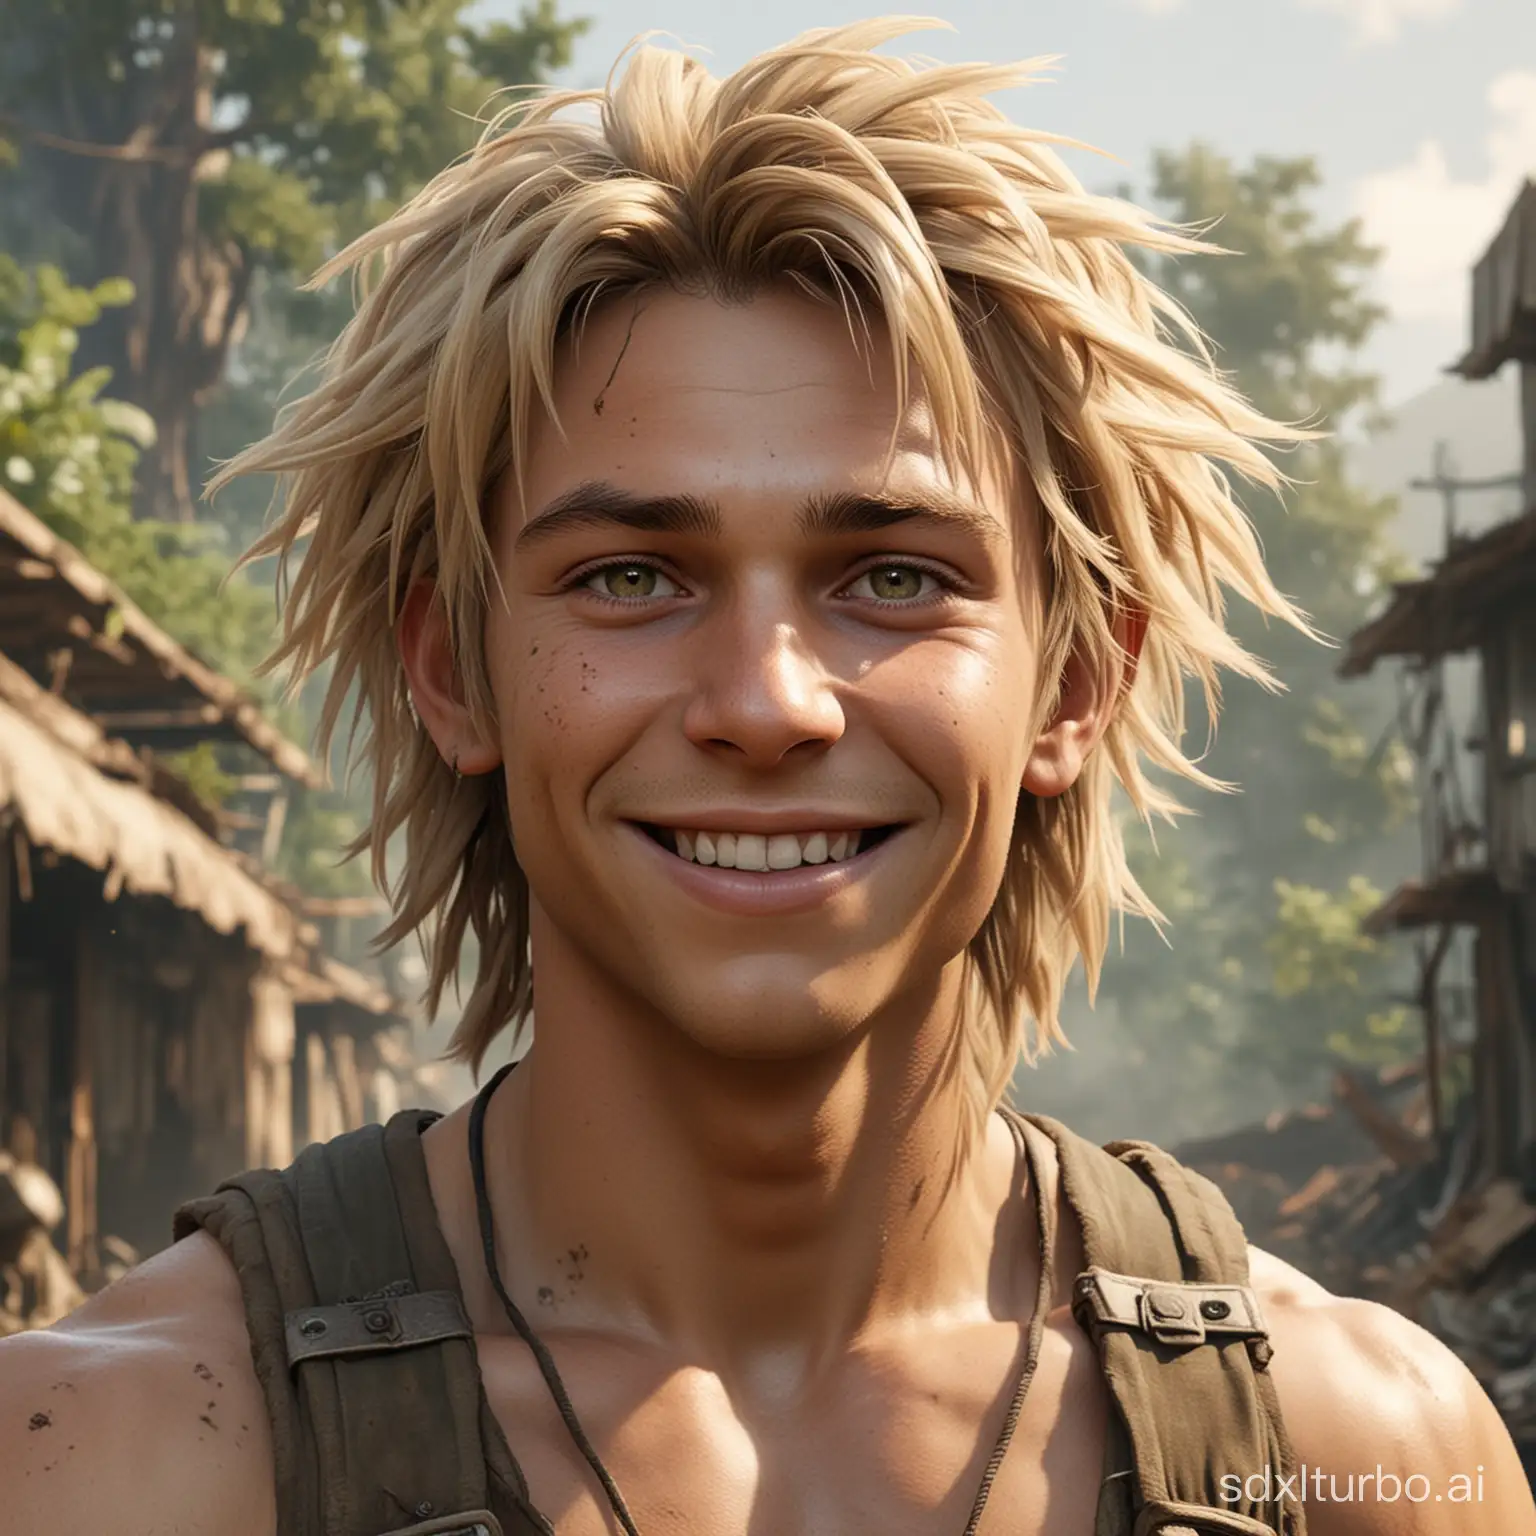 video game character, happy proud tarzan-like boy living in the post apocalypse with unkempt blonde hair